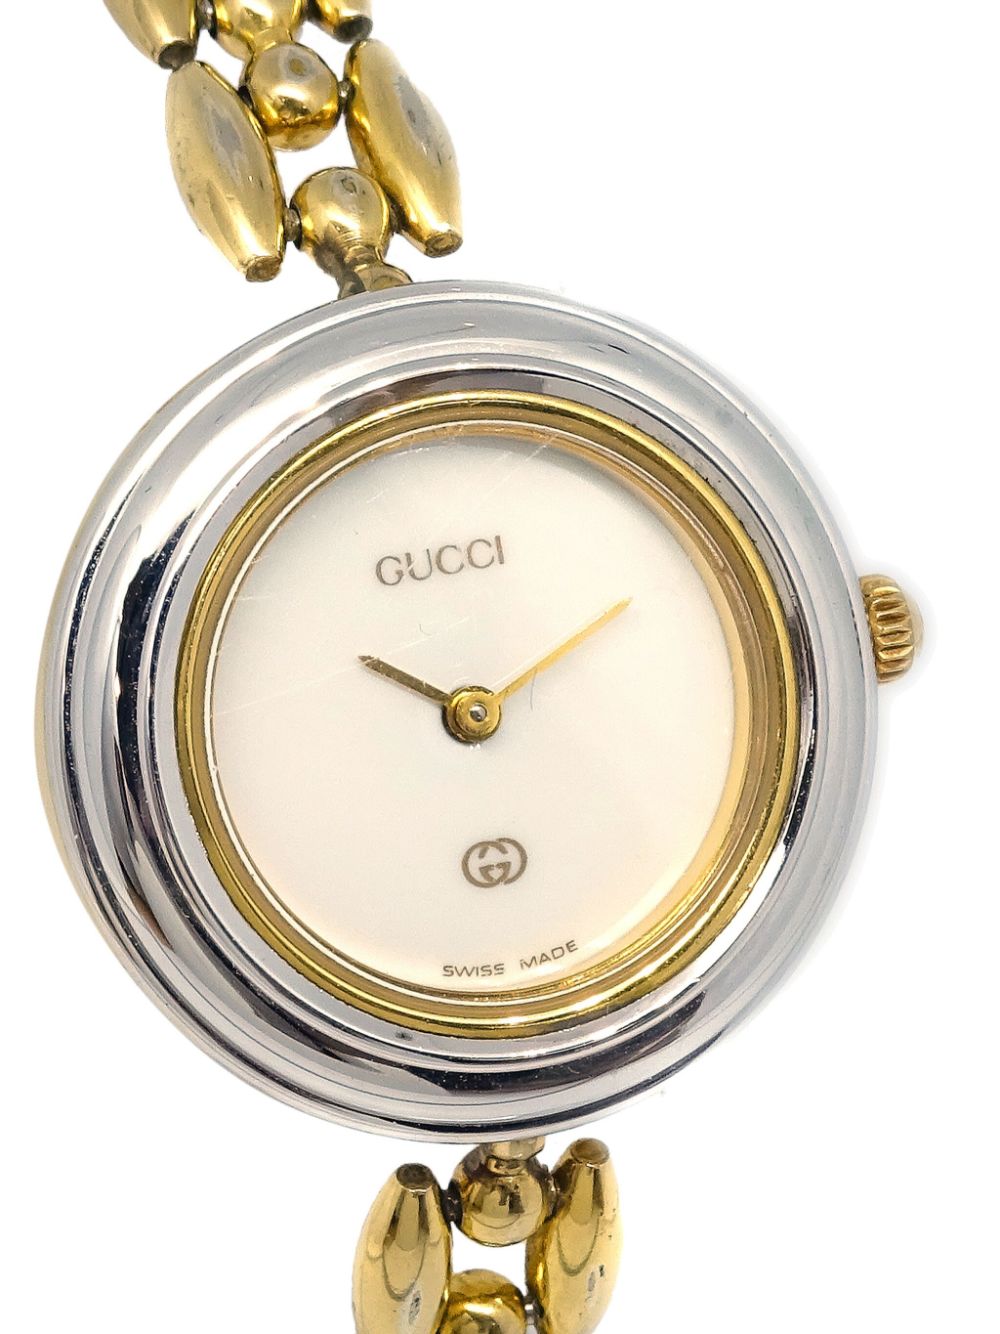 Gucci Pre-Owned 1990-2000 pre-owned Chameleon horloge - Goud